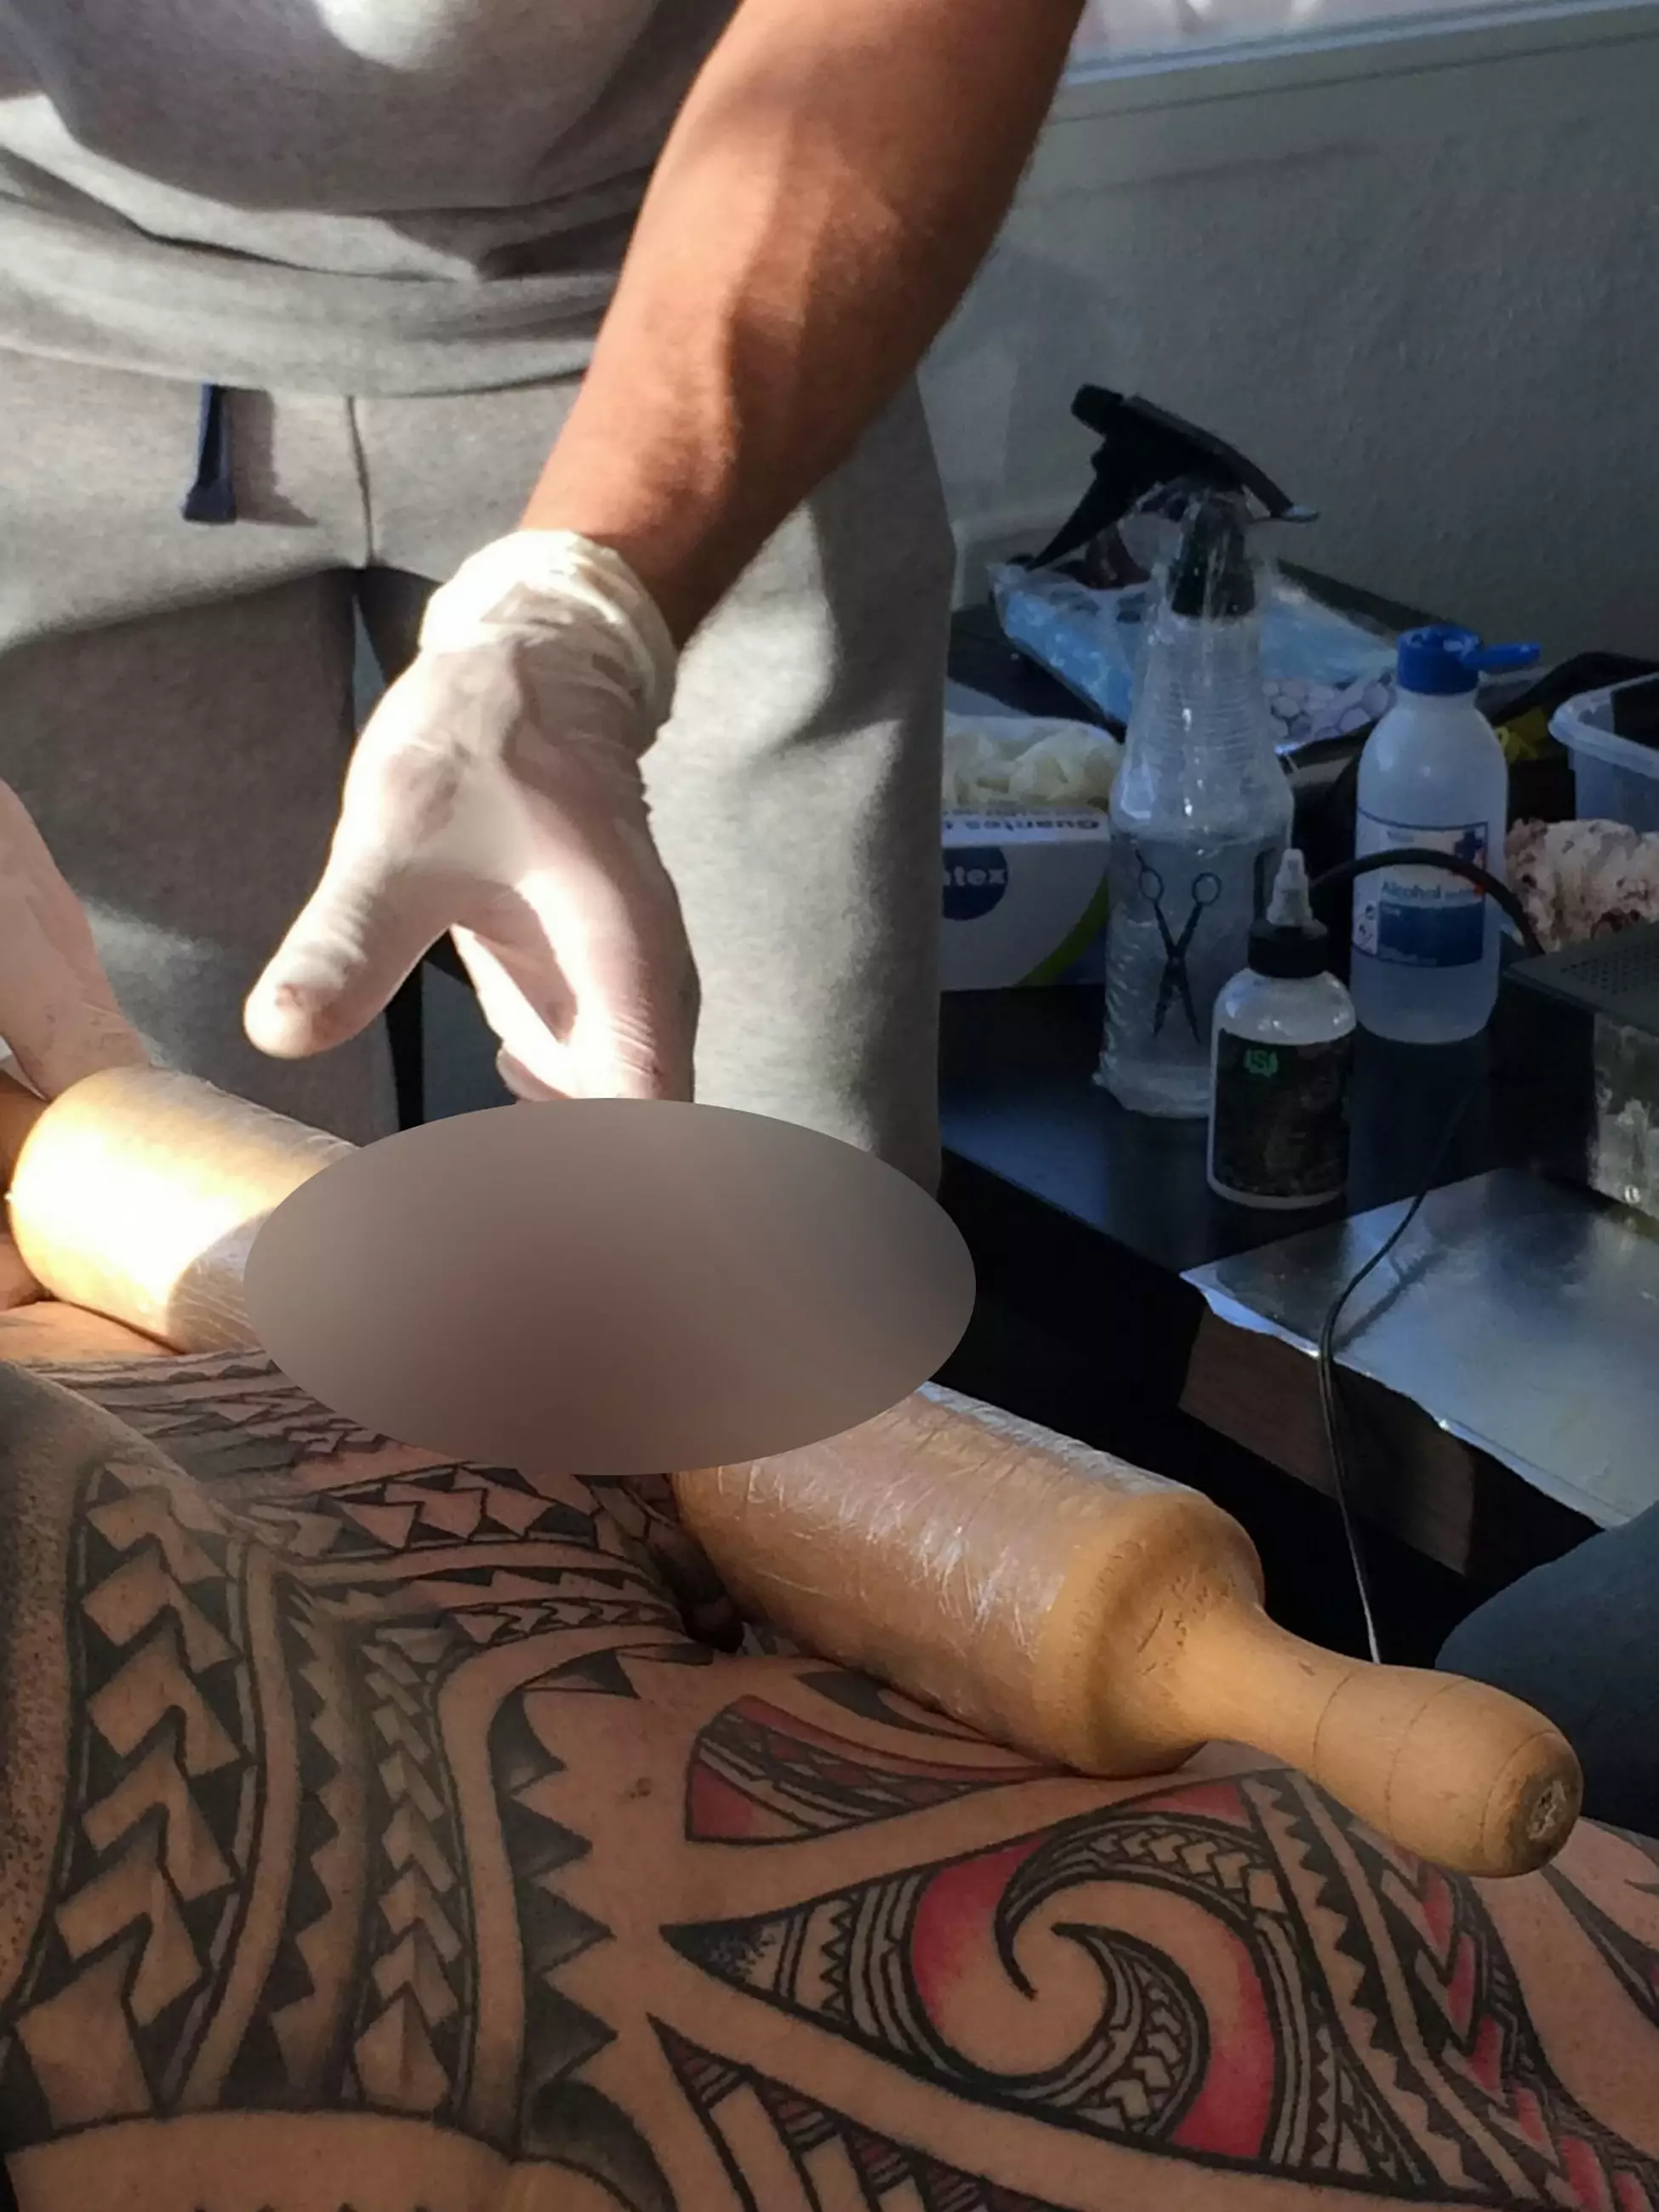 Man Spends £7.5K To Get Every Body Part Tattoo Including His Penis.